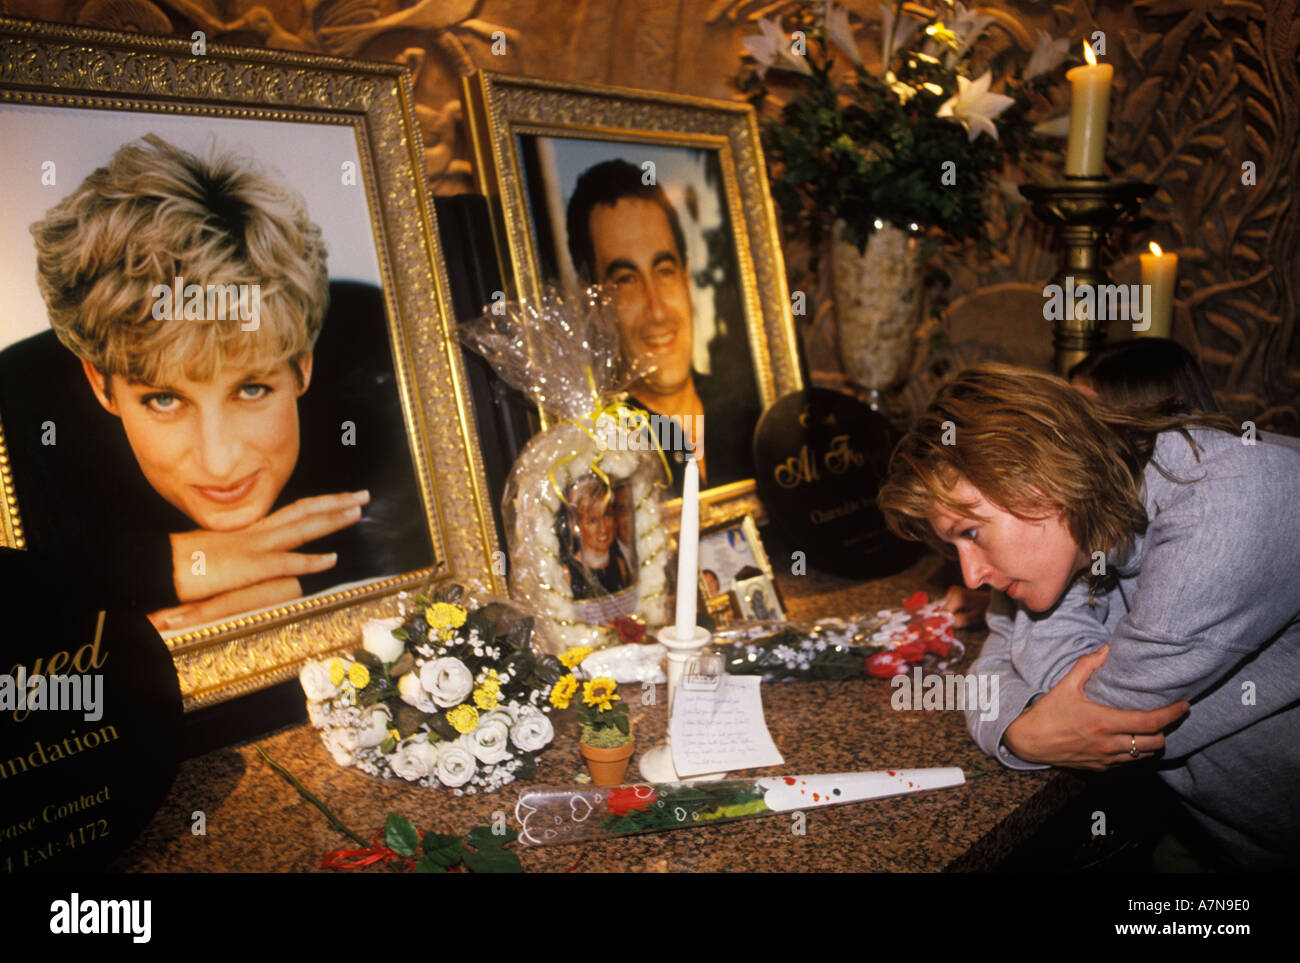 Princess Diana of Wales and Dodi Fayed memorial in Harrods department store Knightsbridge London England 1998 1990s UK HOMER SYKES Stock Photo